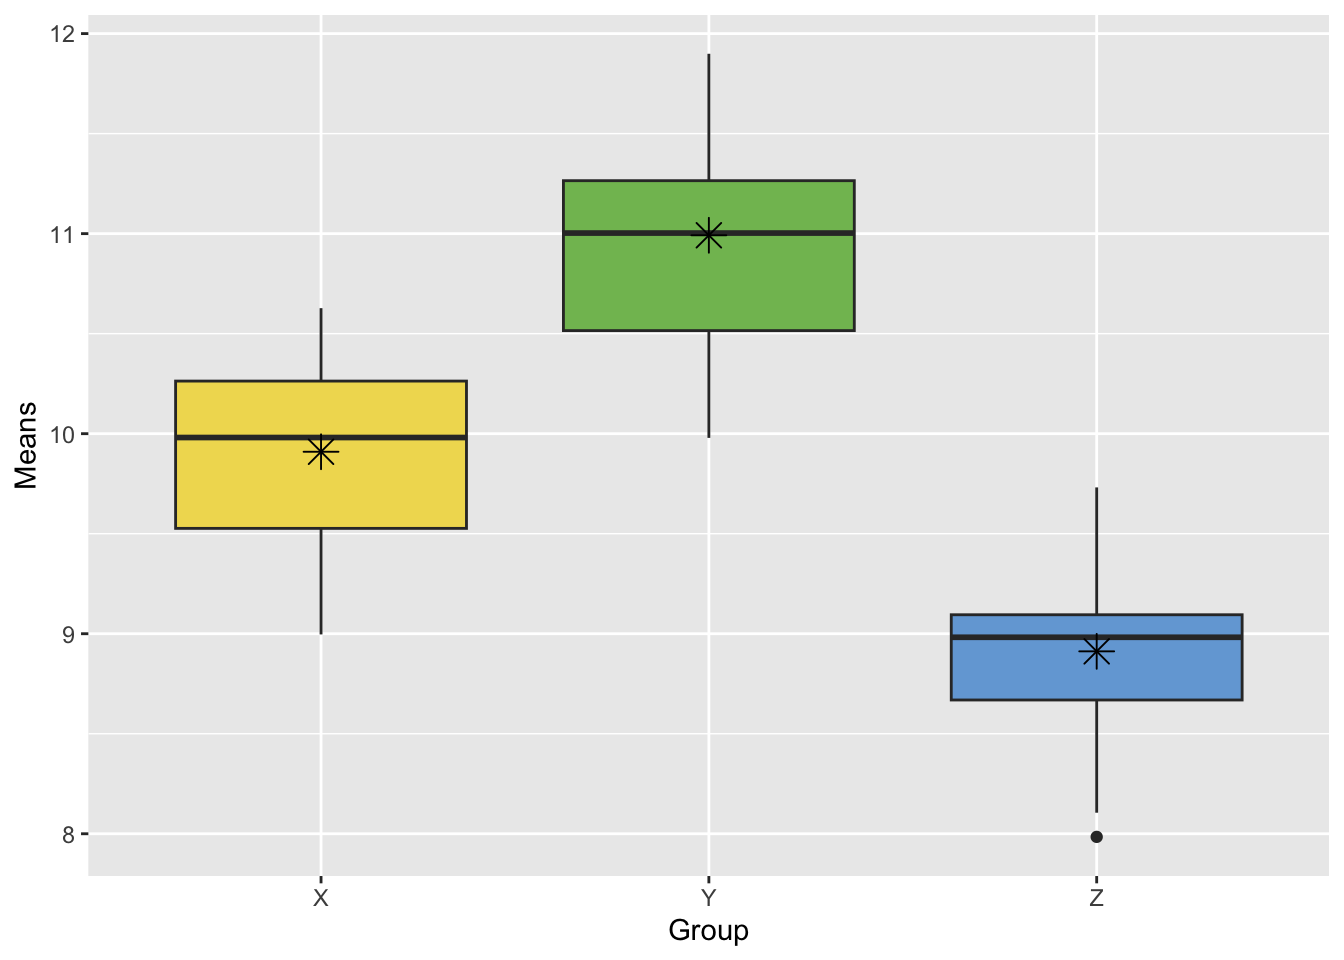 Comparative boxplots of the bootstrap distributions of sample means